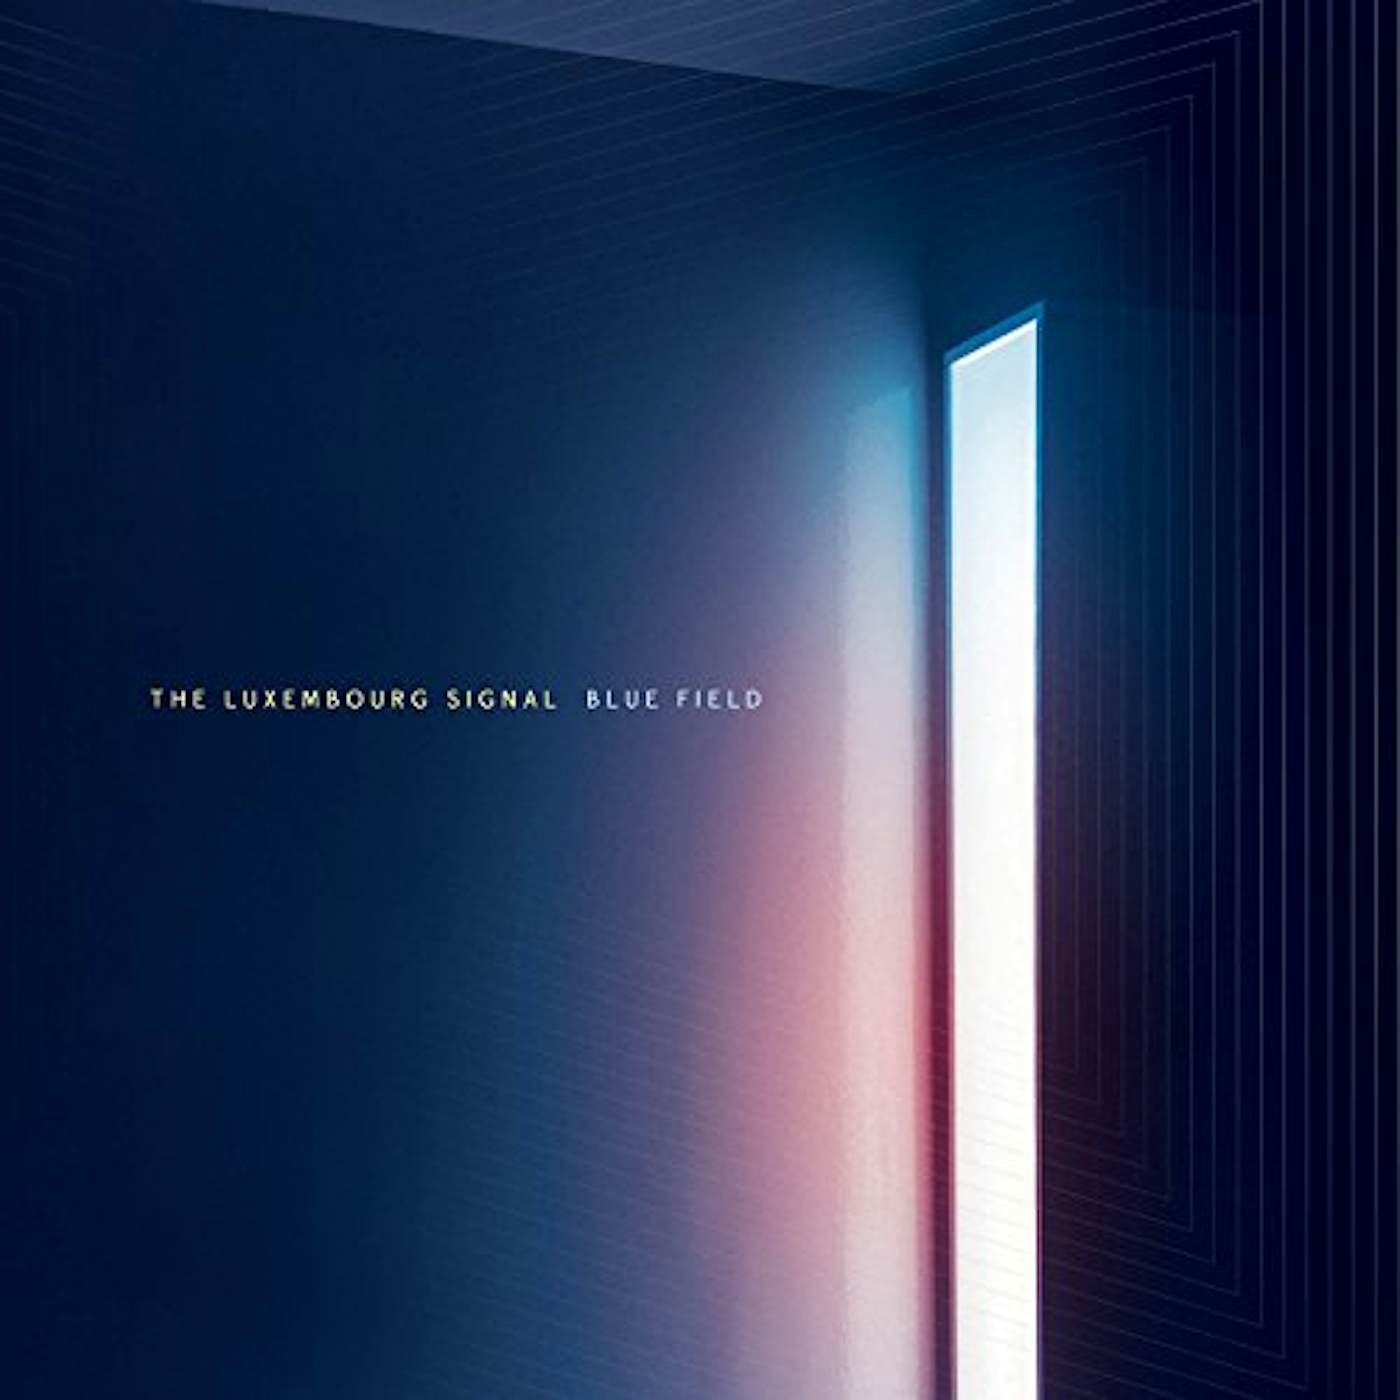 The Luxembourg Signal Blue Field Vinyl Record